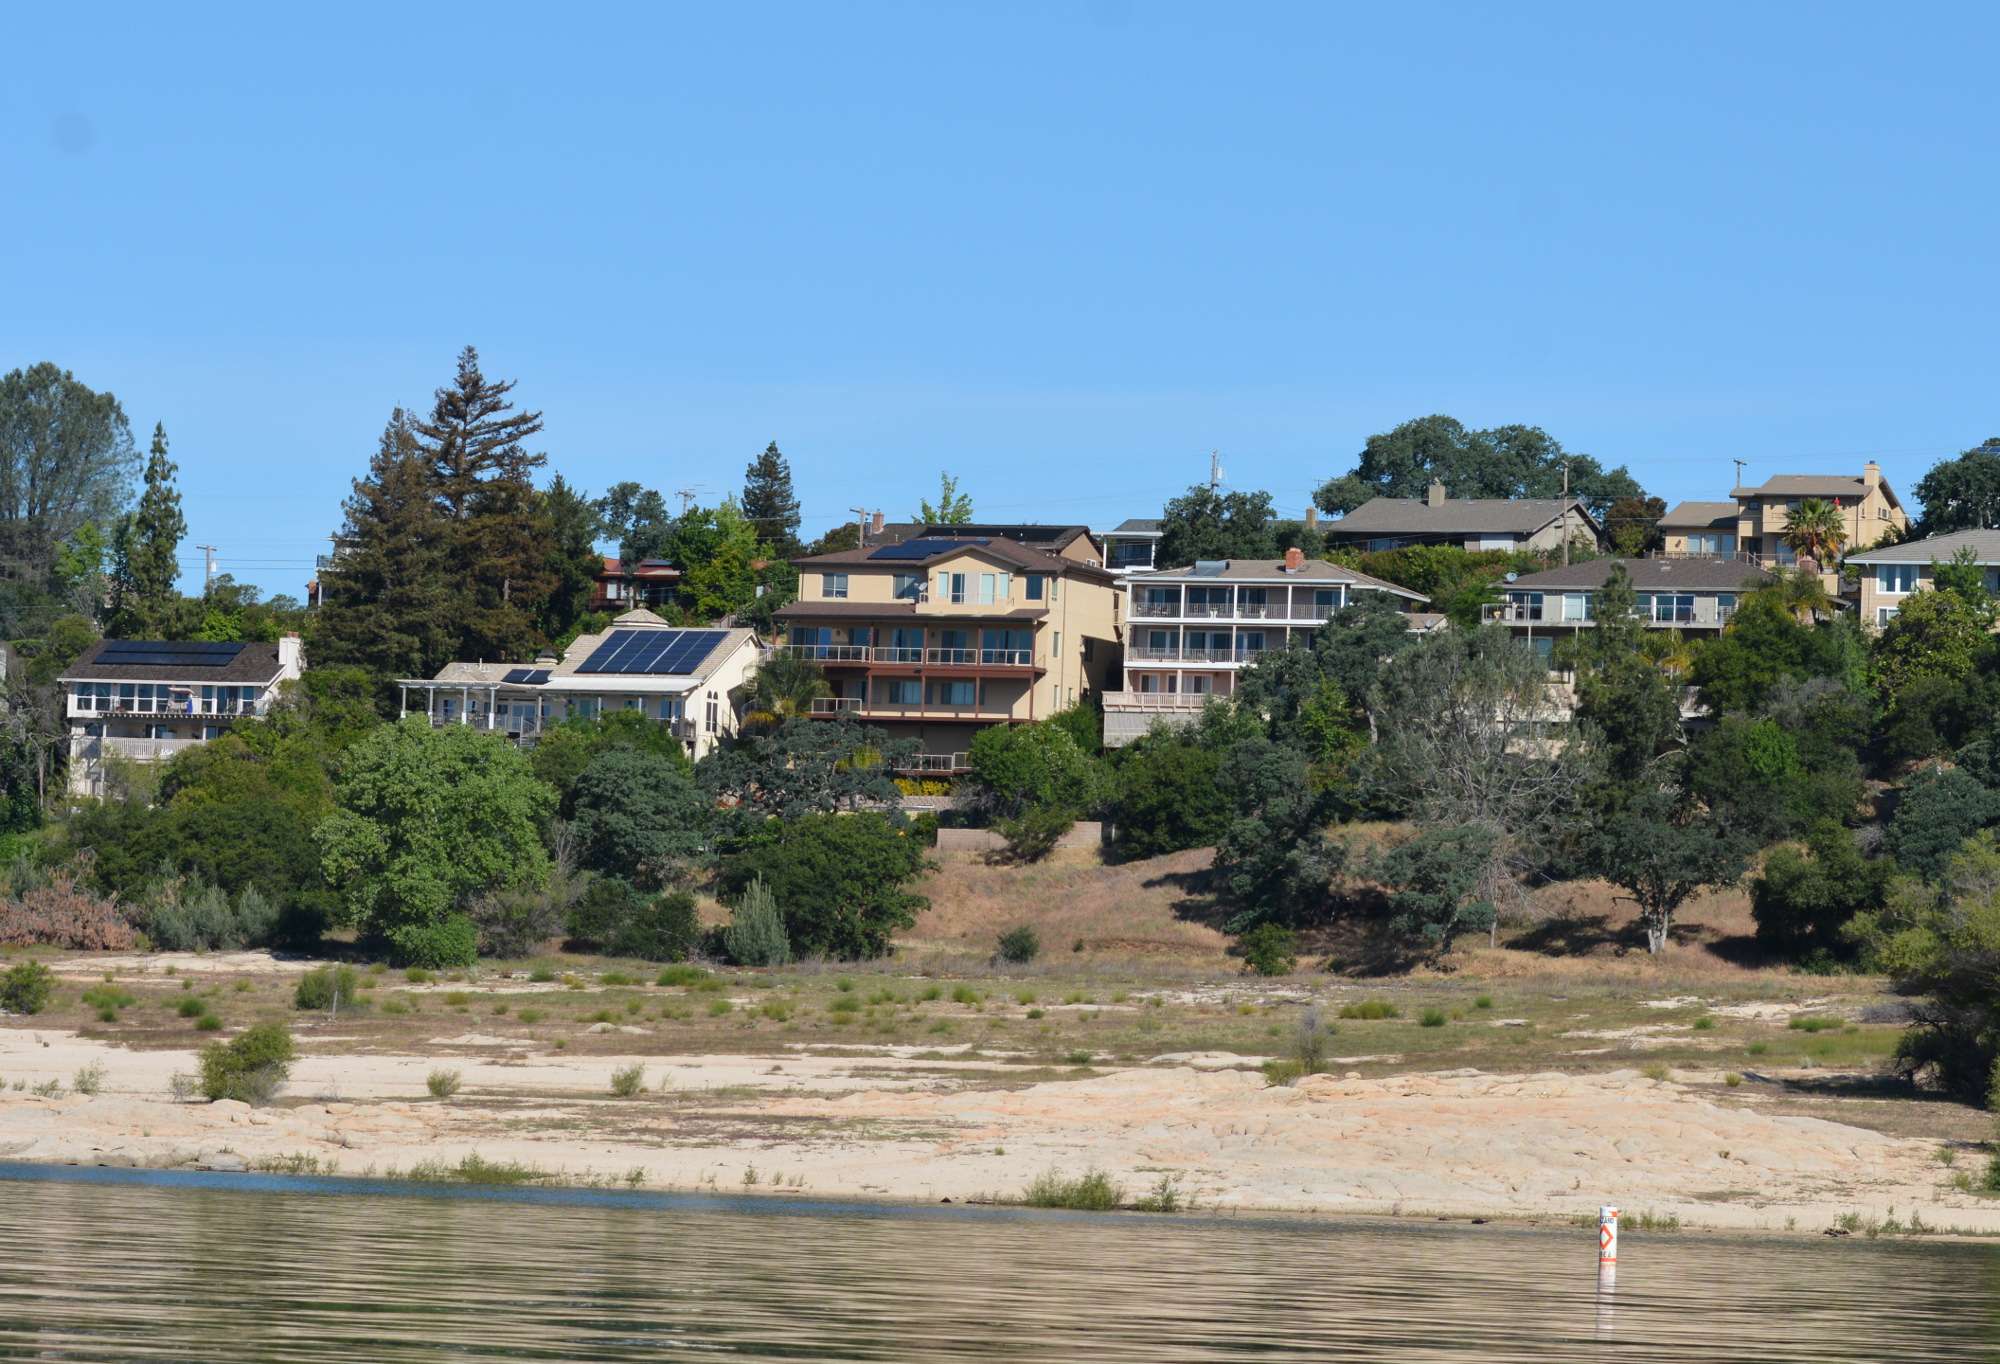 Just south of the Granite Bay launch area is another real estate haven ...